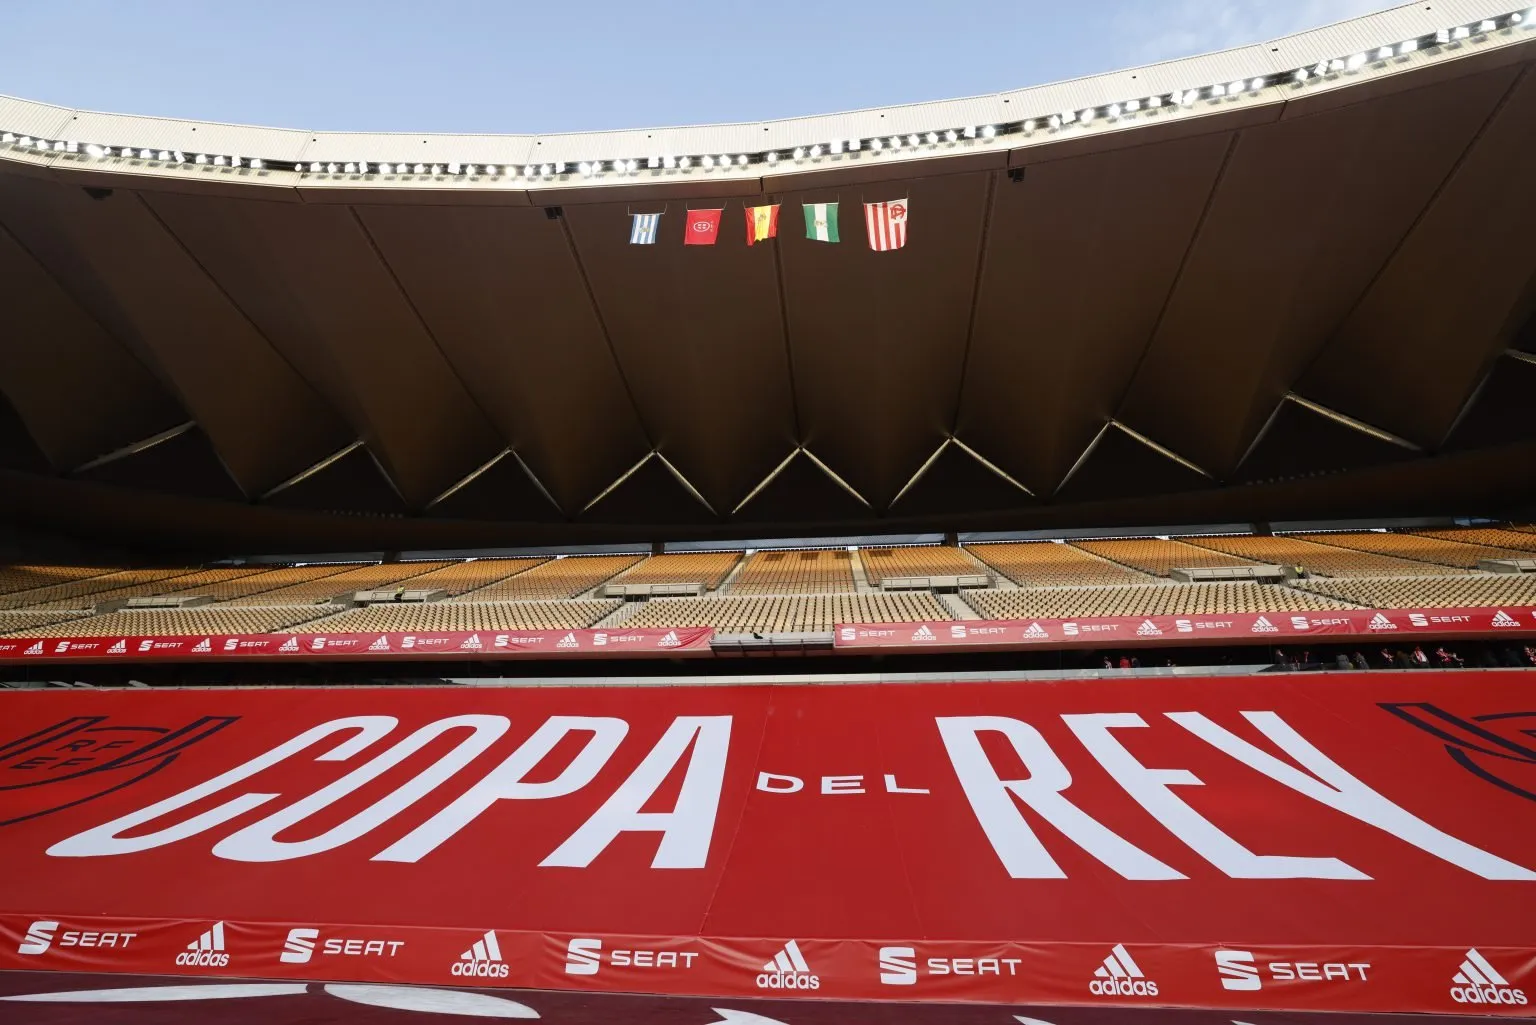 2023 Copa Del Rey Prize Money: how much will the winning team get in prize money?